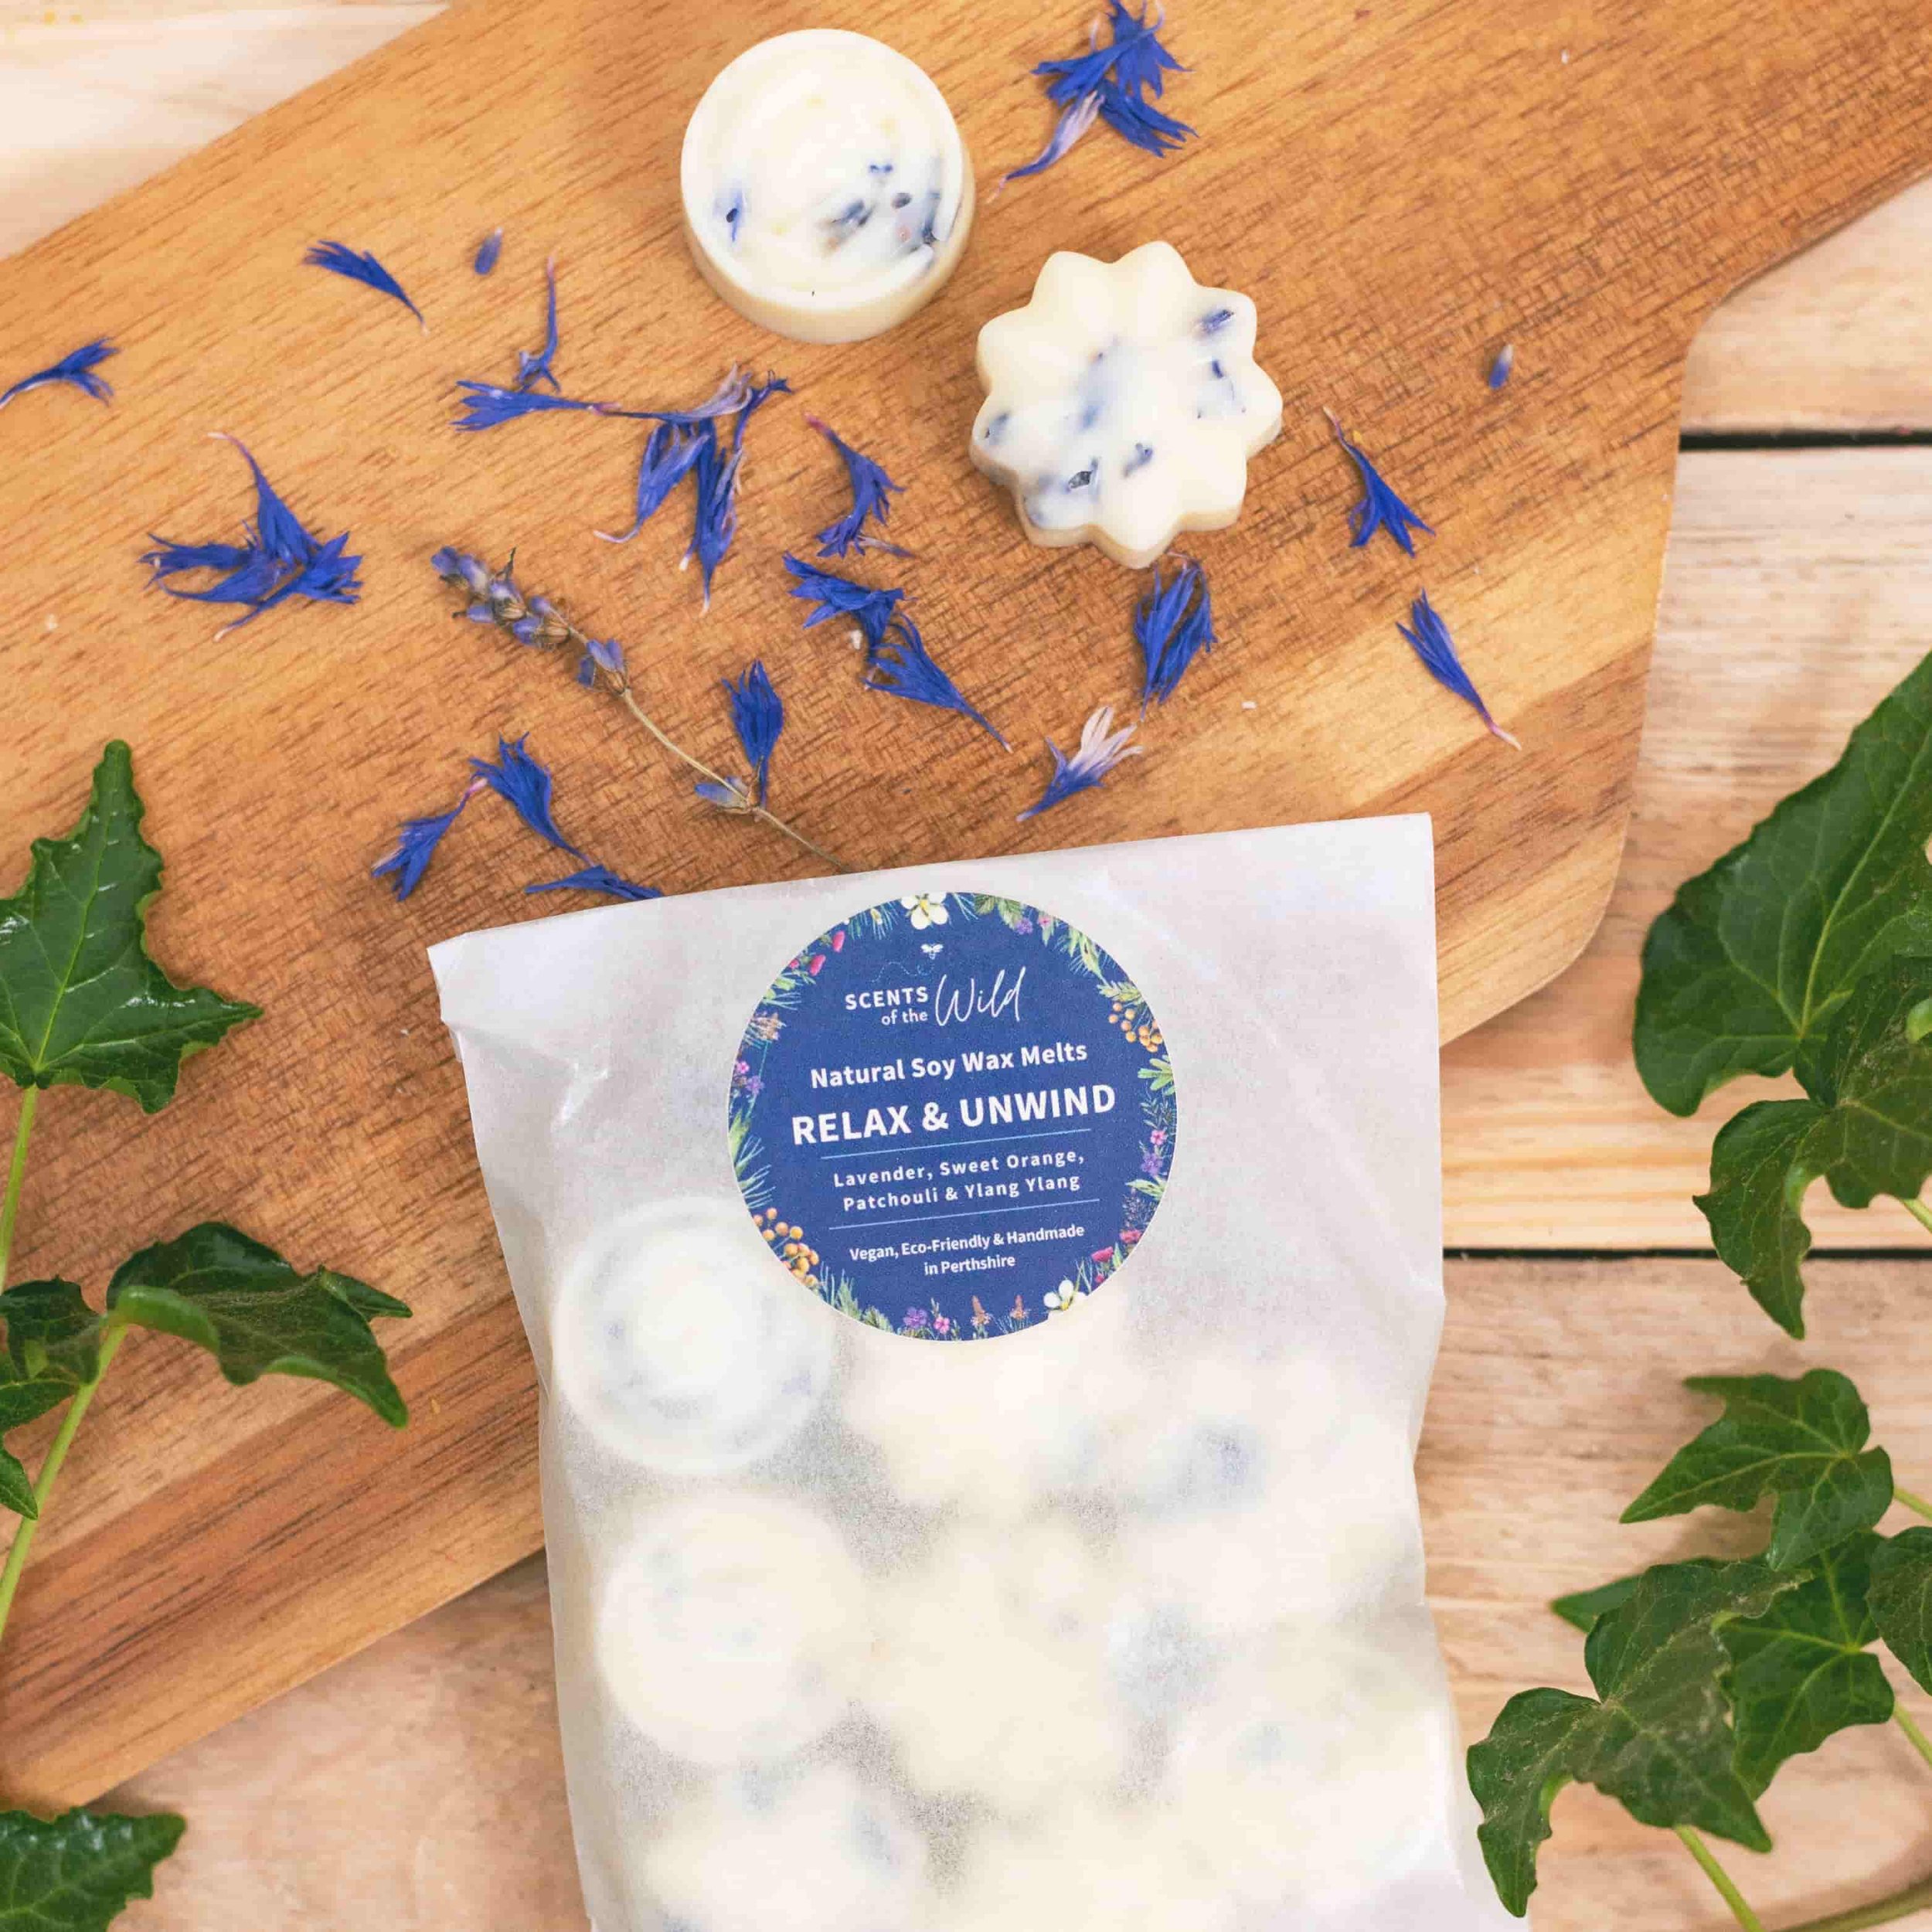 Packet of Relax and Unwind botanical wax melts and sried botanicals.jpg